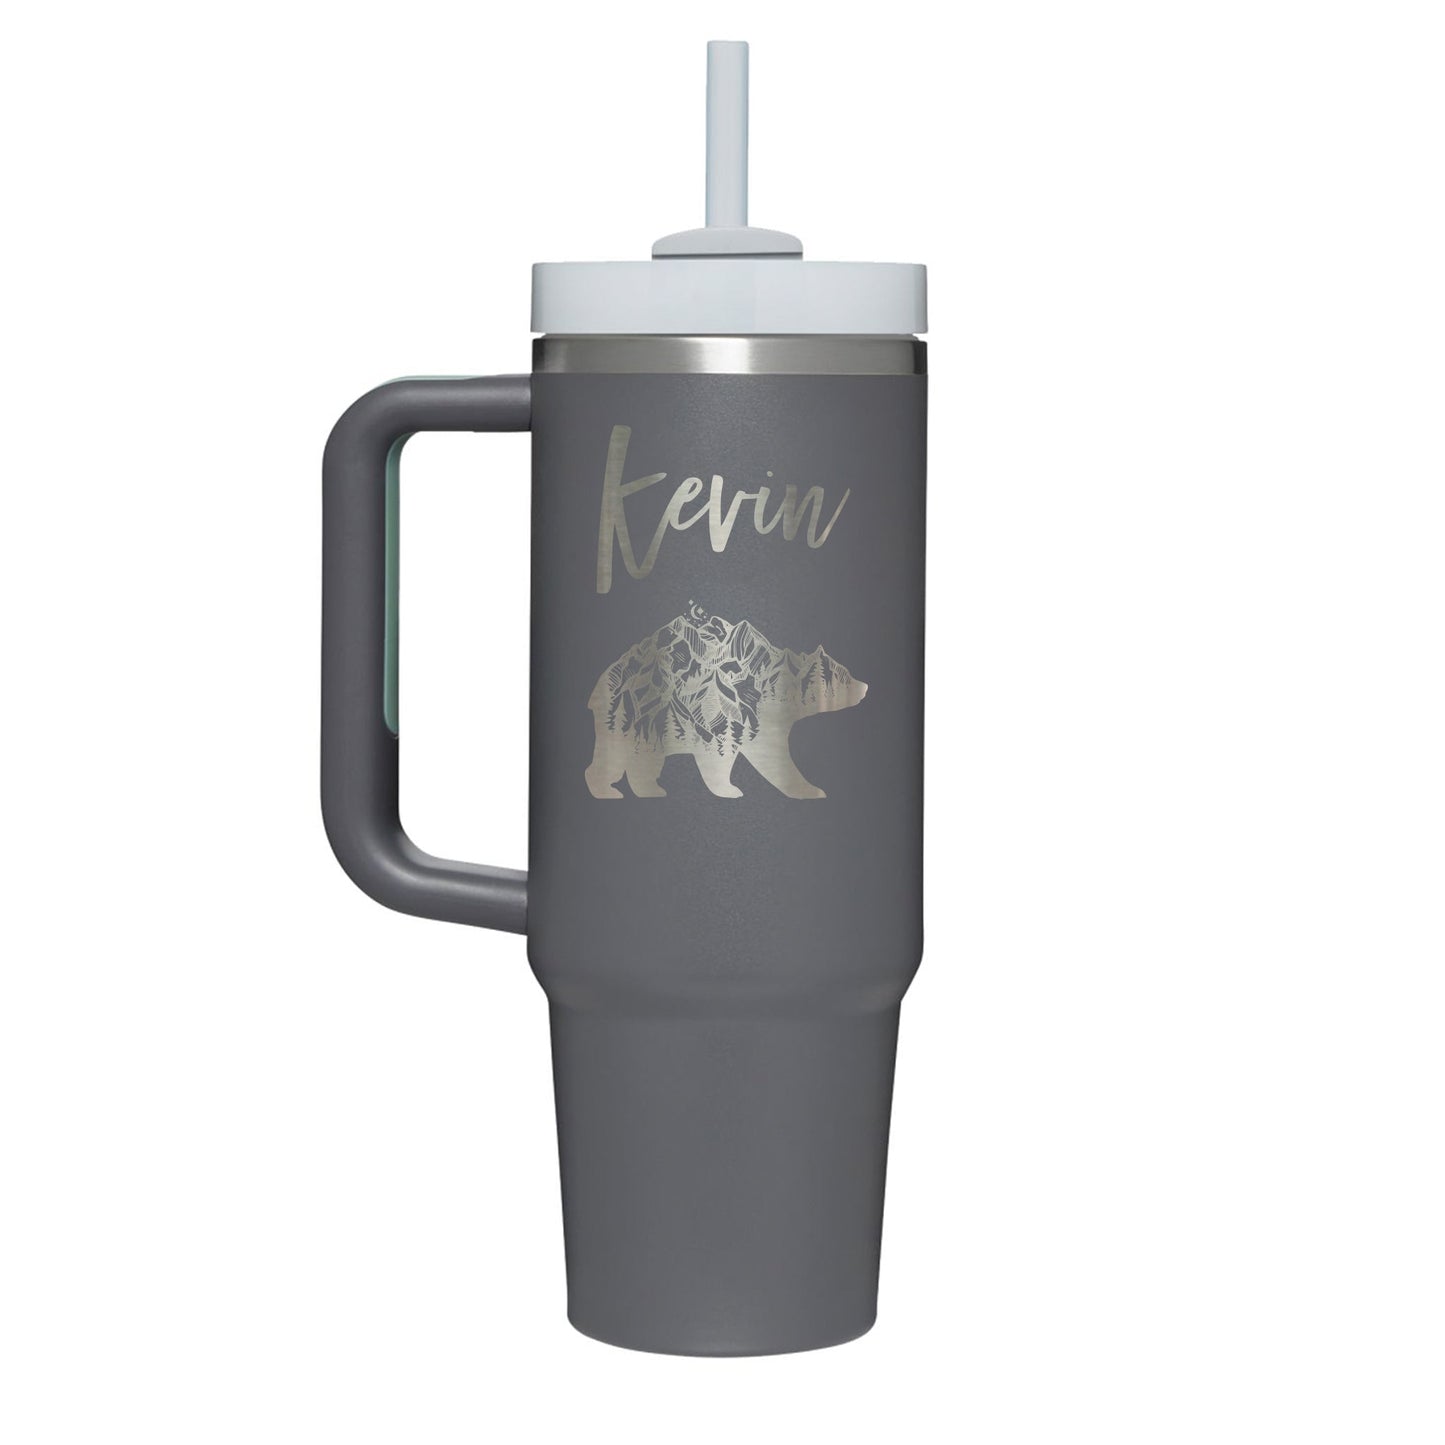 Personalized STANLEY® Quencher H2.0 FlowState™ Tumbler - 30 oz - Etchified-STANLEY®-1603-02CH